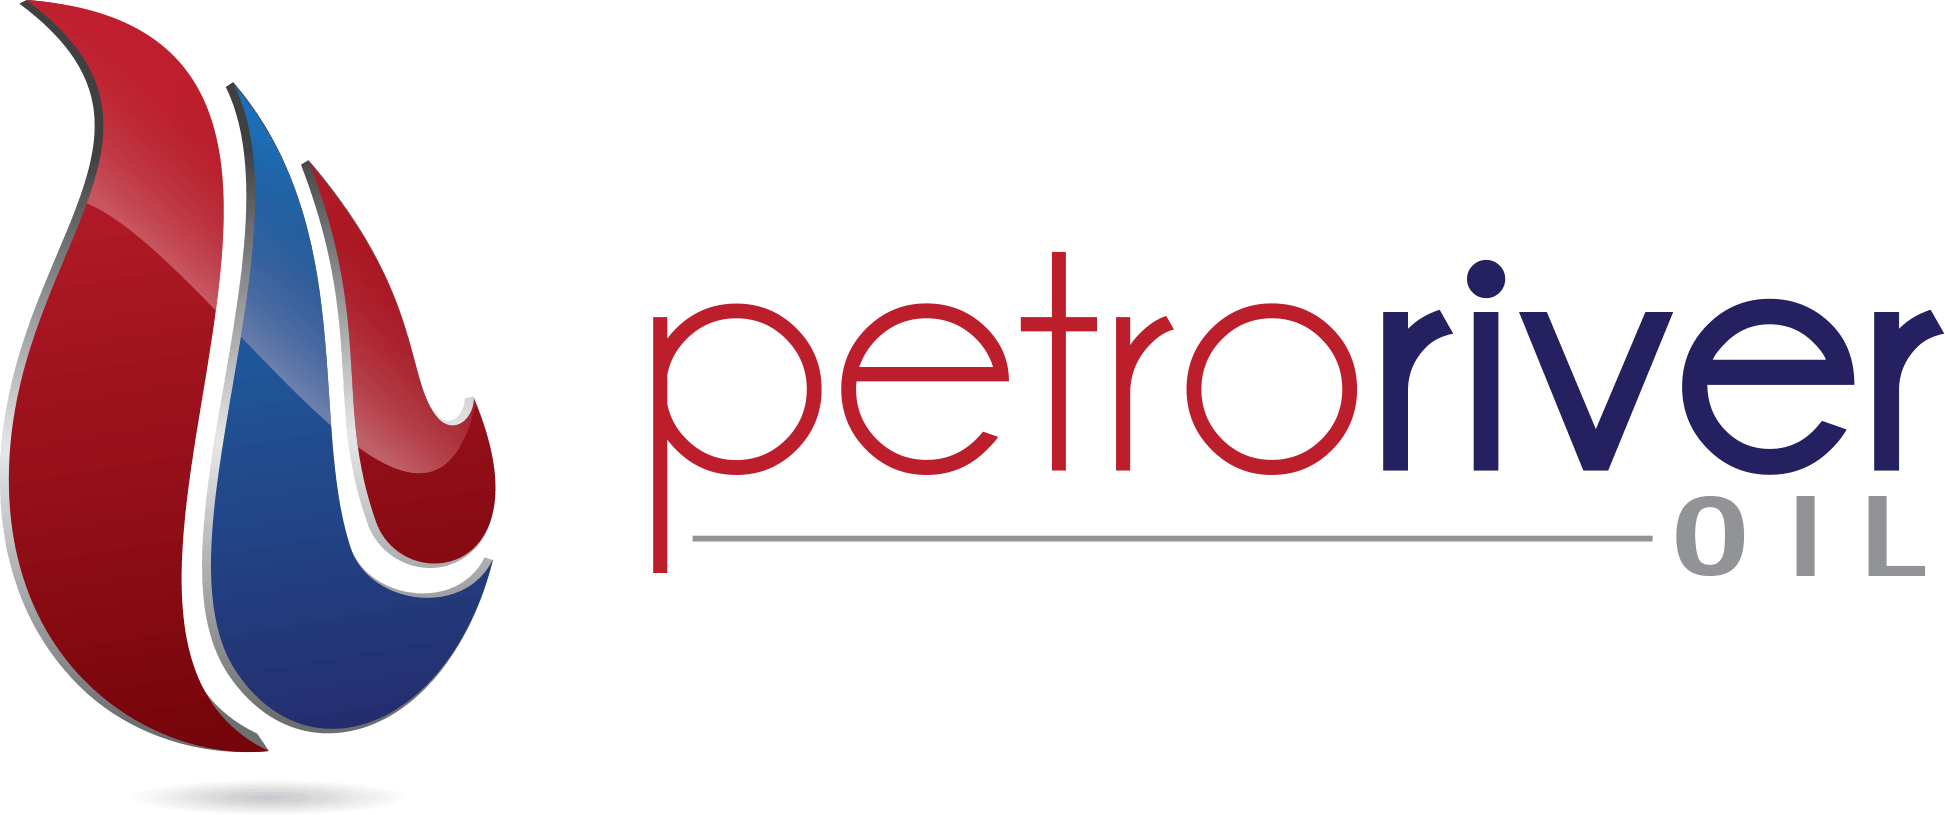 Petro Logo - Petro River Oil – Discovering The Undiscovered